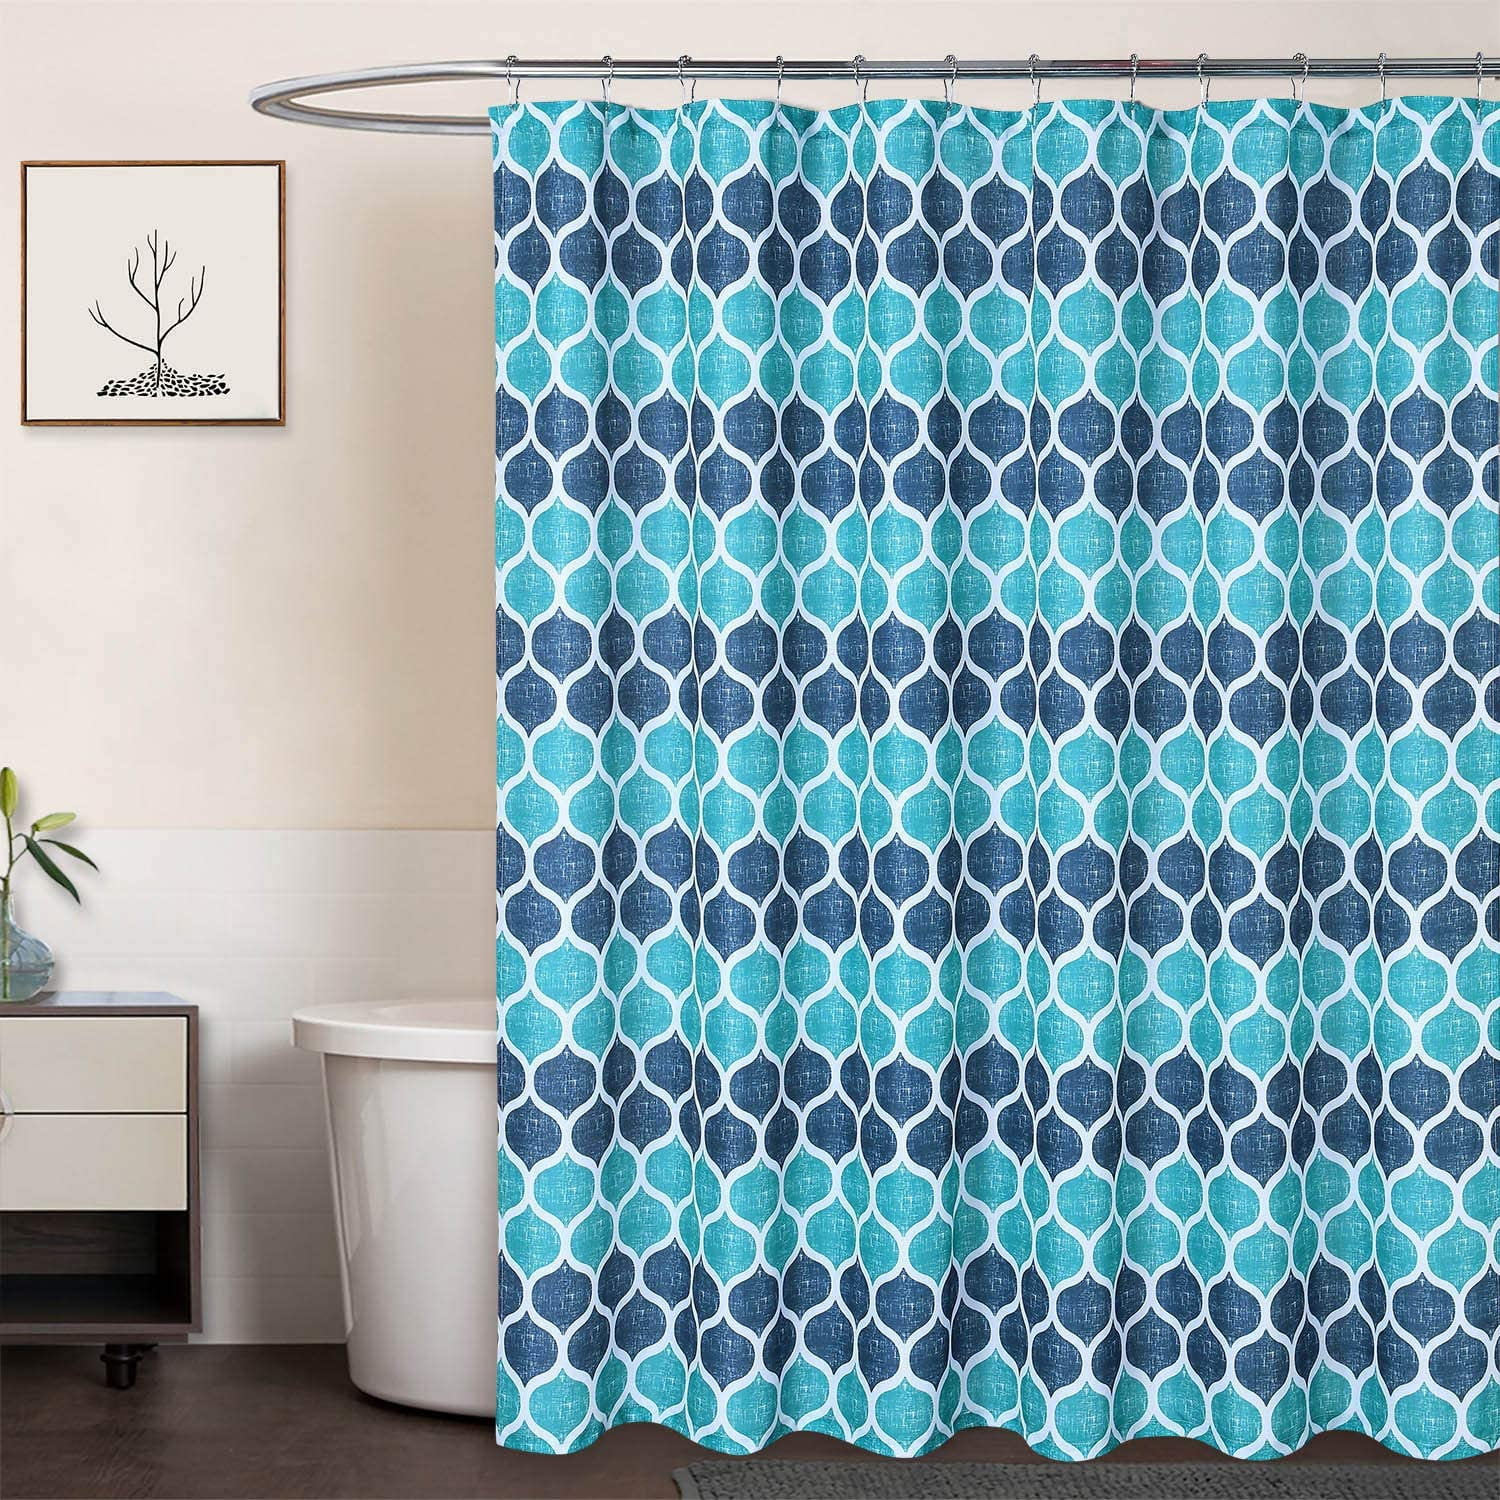 New Beautiful Blush Black Teal Grey Navy Taupe Fretwork Shower Curtain 72 x 72" 